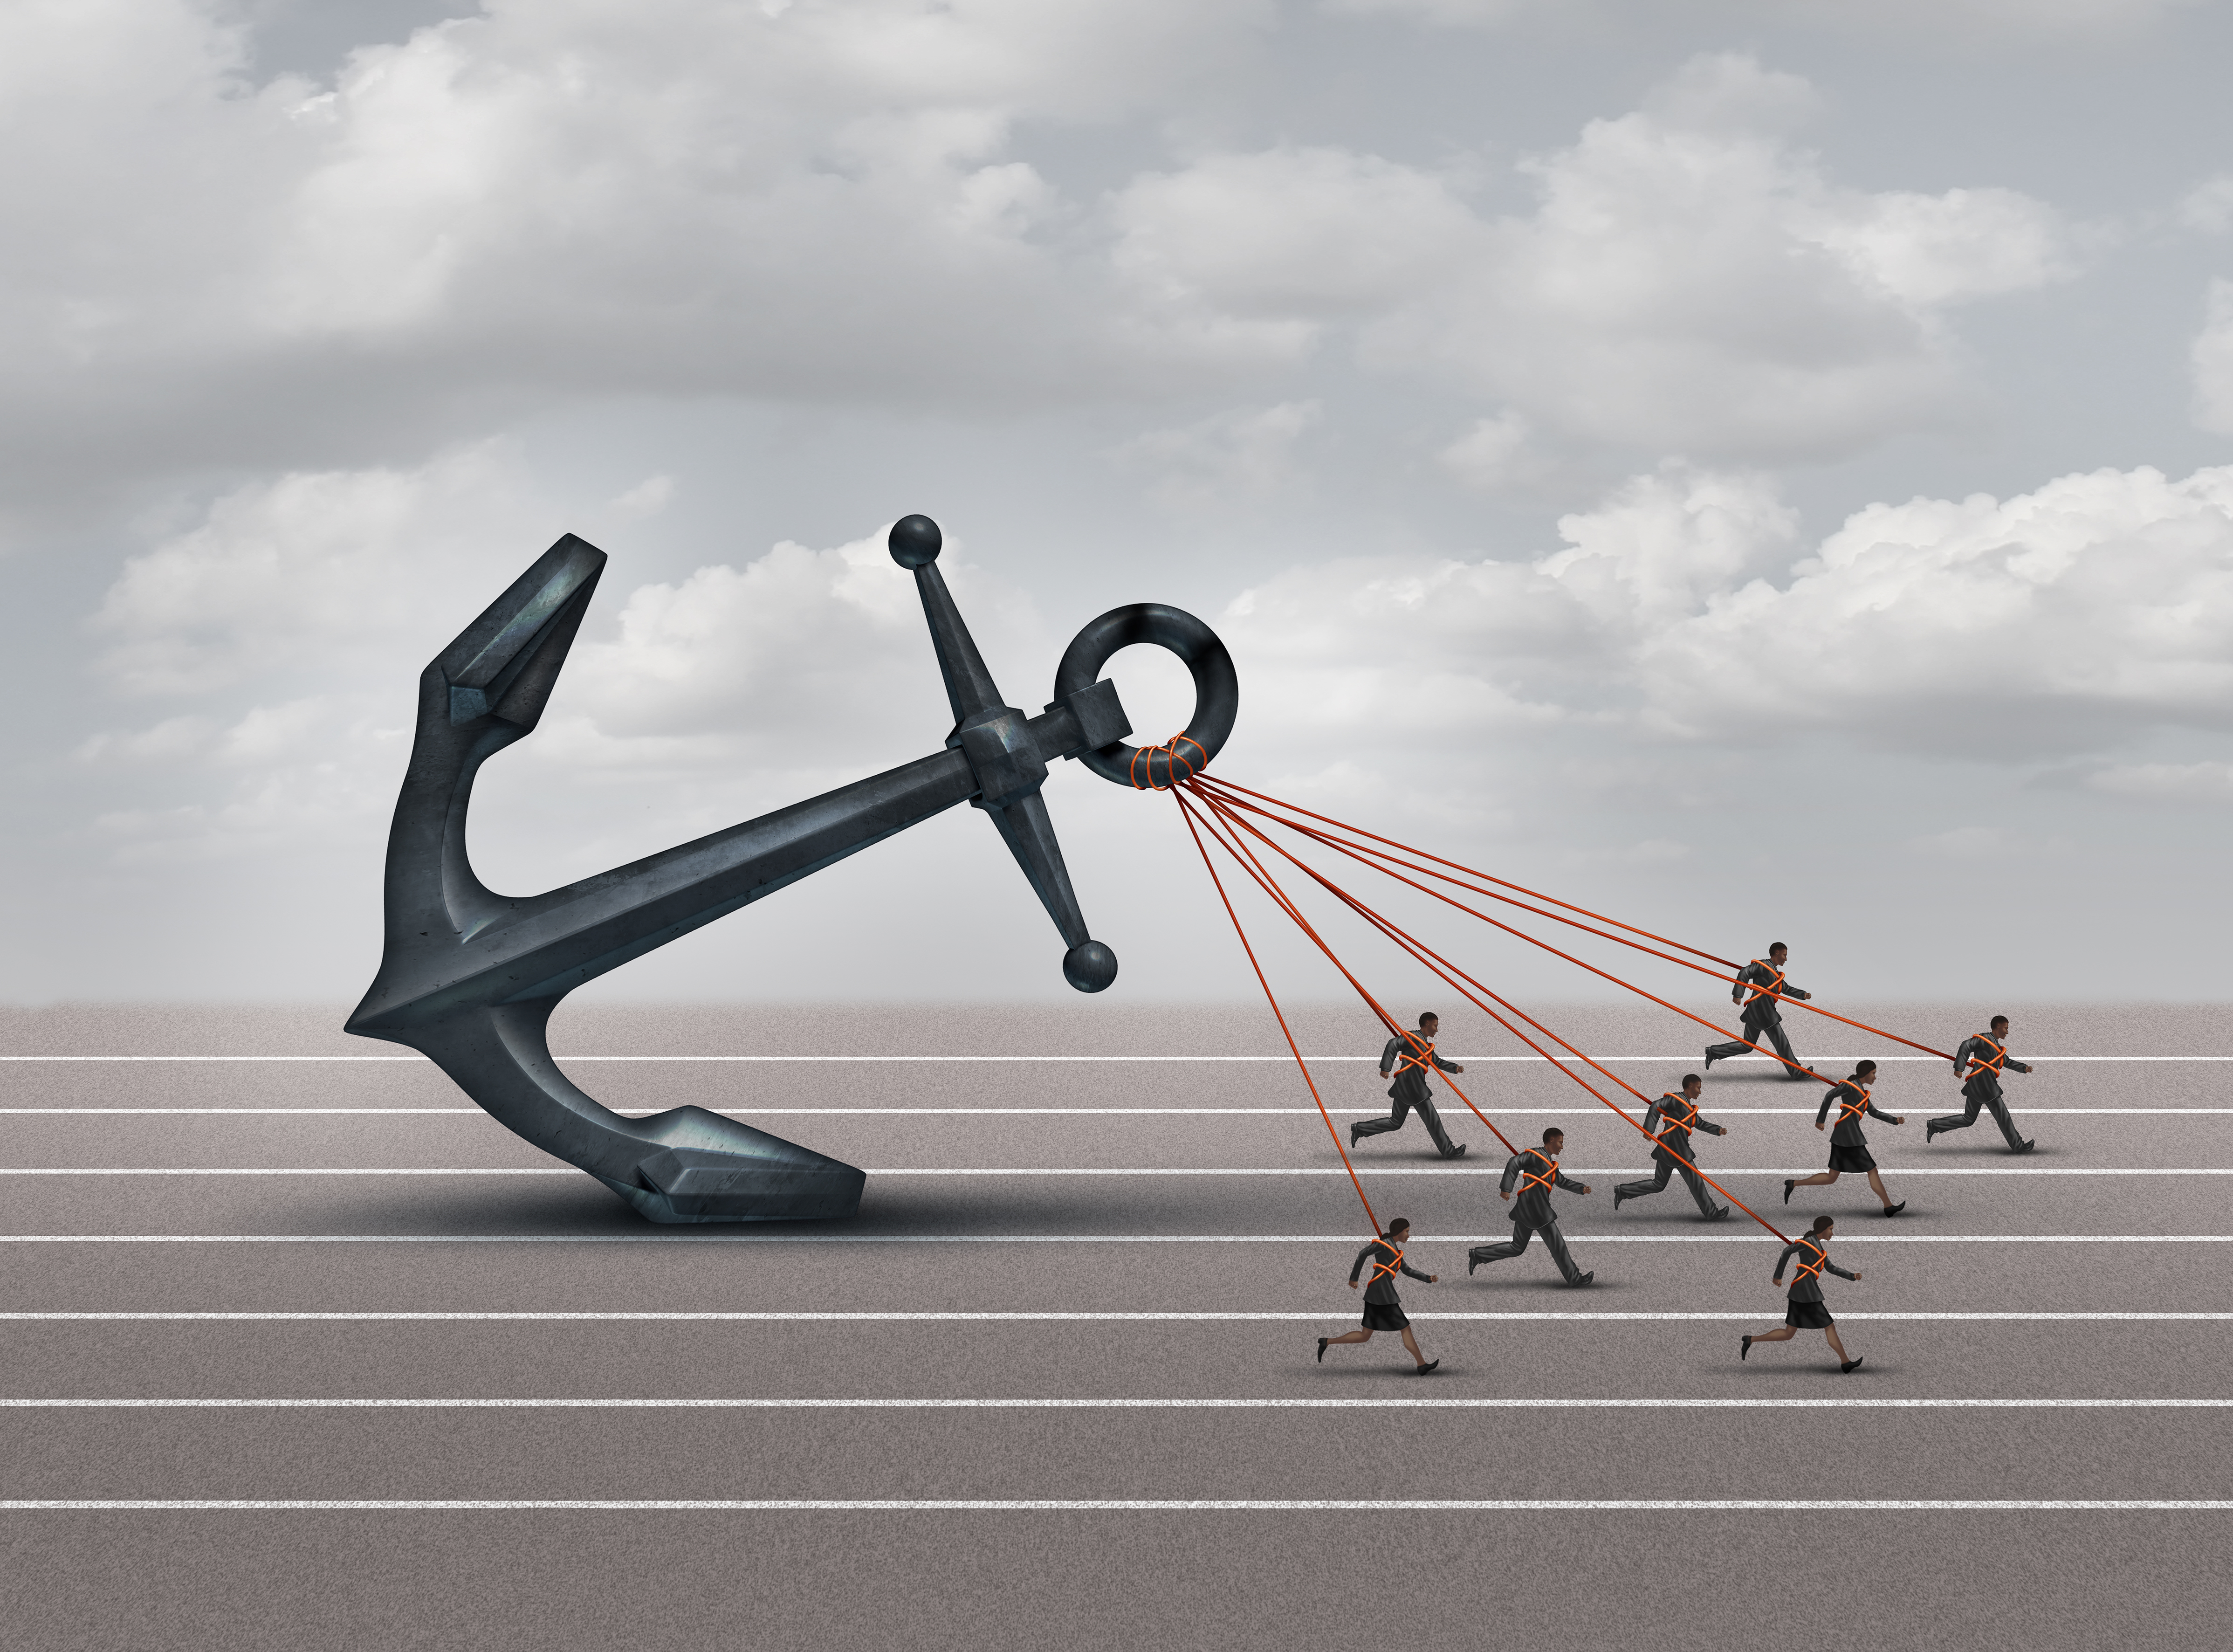 Business group challenge as a team of workers pulling a heavy anchor together as a corporate metaphor for overcoming the burden and obstacles of a company with 3D illustration elements.